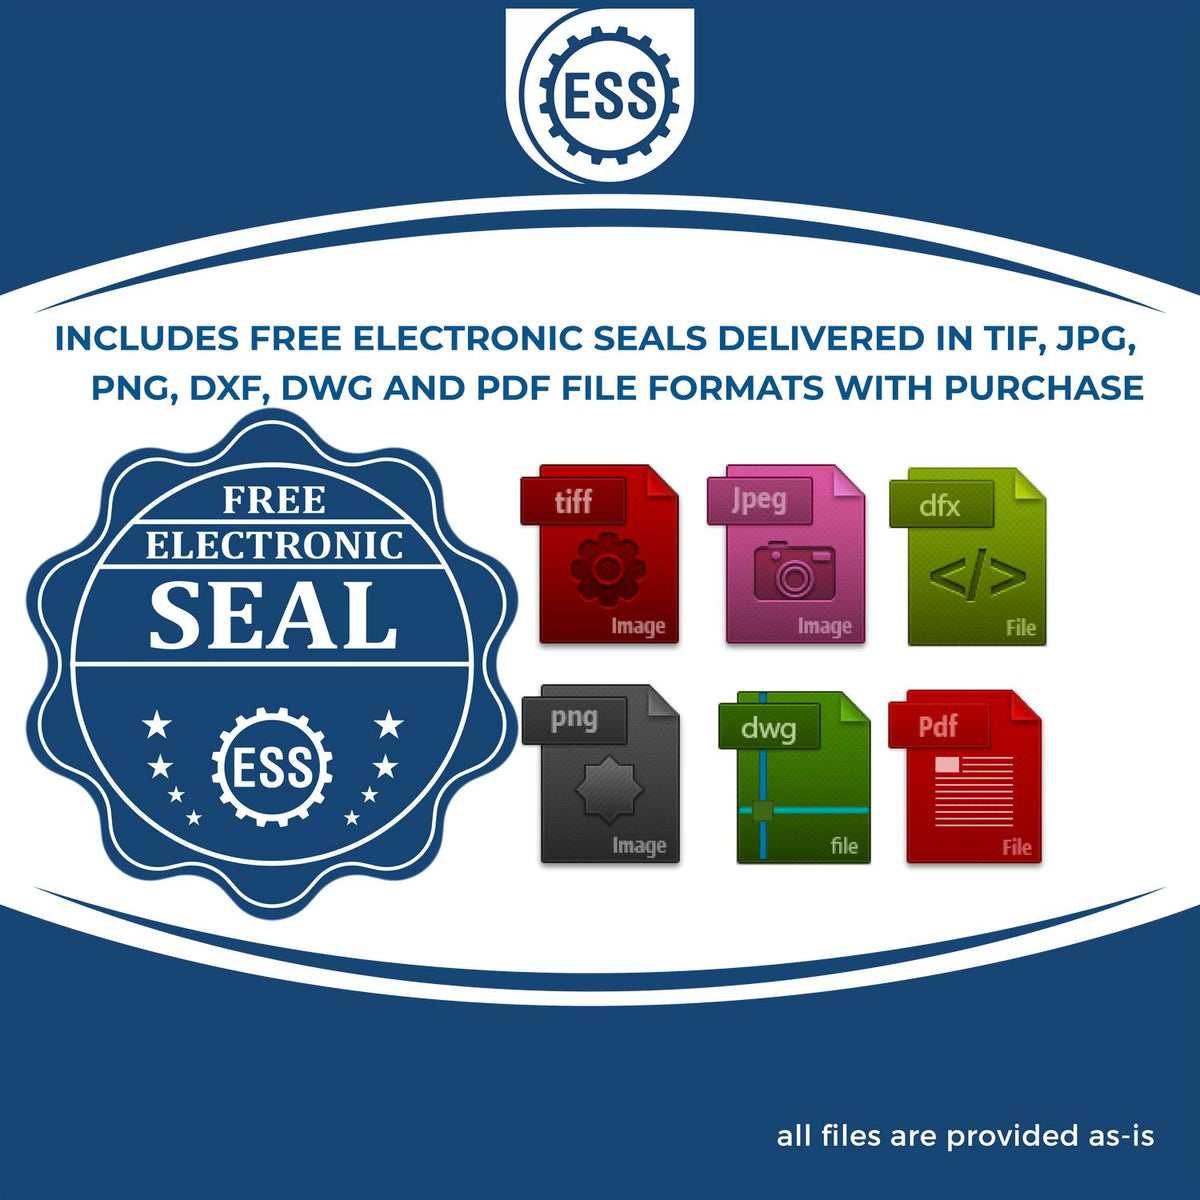 An infographic for the free electronic seal for the Slim Pre-Inked Virginia Professional Geologist Seal Stamp illustrating the different file type icons such as DXF, DWG, TIF, JPG and PNG.